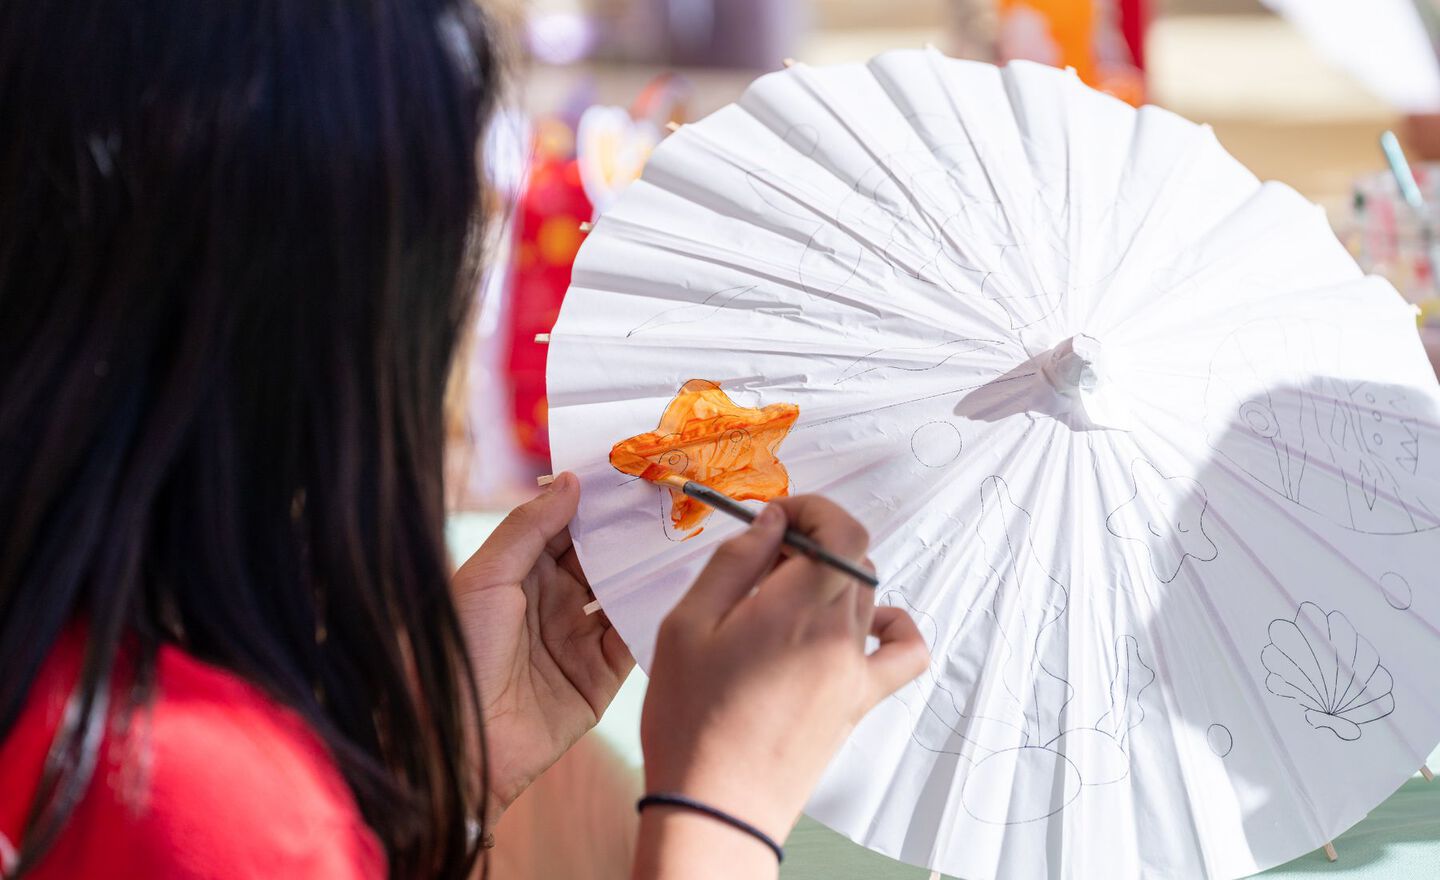 A young girl painting an orange star on a paper umbrella